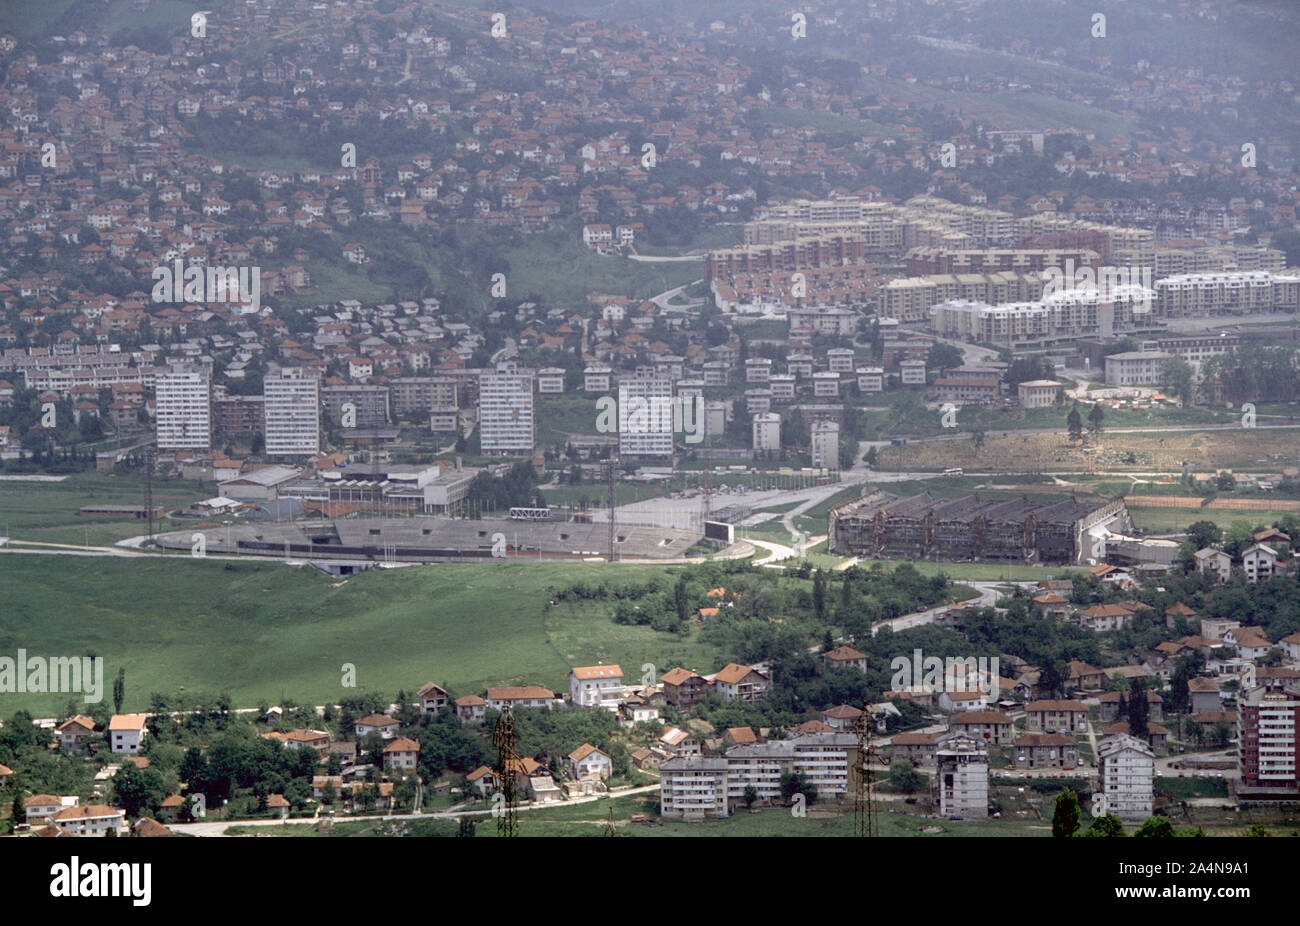 6th June 1993 During the Siege of Sarajevo: the view due east from Hum Hill. The Koševo City Stadium is almost centre-frame with the burned-out Juan Antonio Samaranch Olympic Hall (formerly known as the Zetra Olympic Hall) to the right. Stock Photo